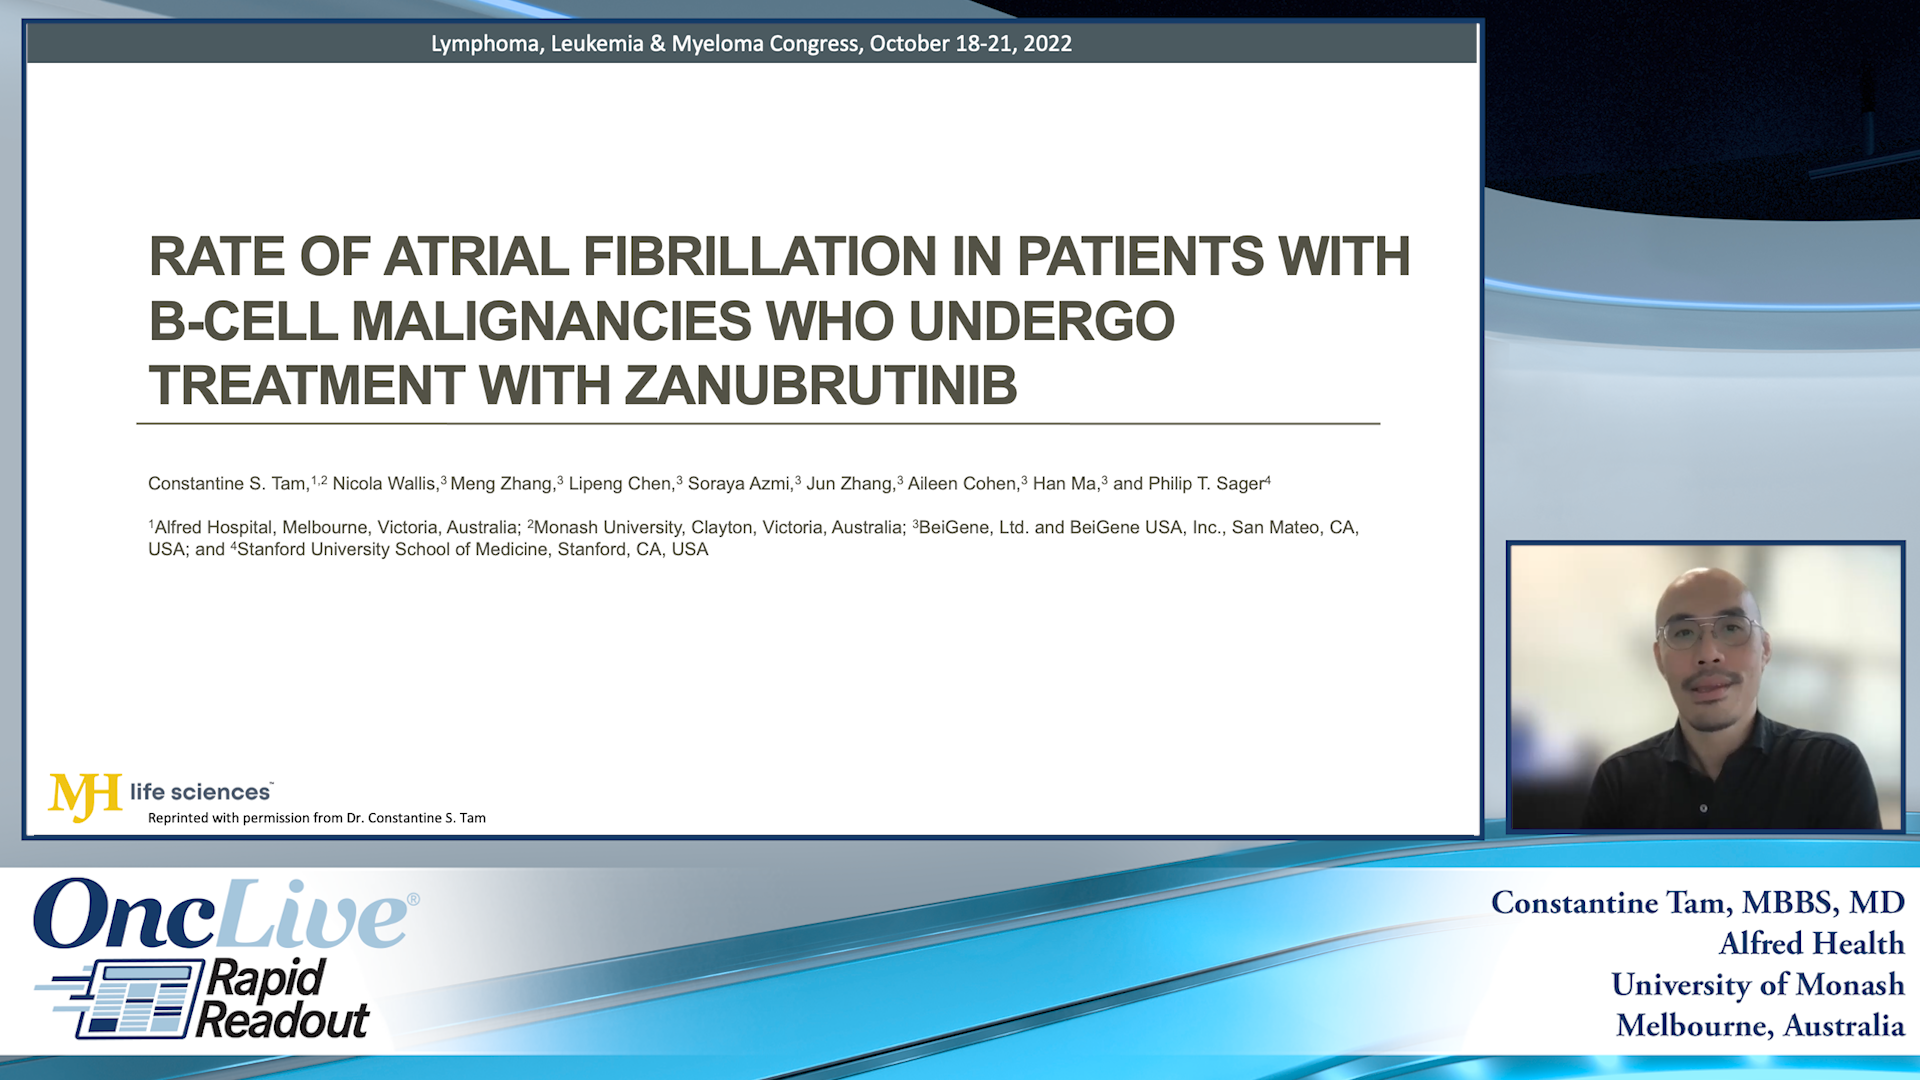 Rate of Atrial Fibrillation in Patients With B-Cell Malignancies Who Undergo Treatment With Zanubrutinib